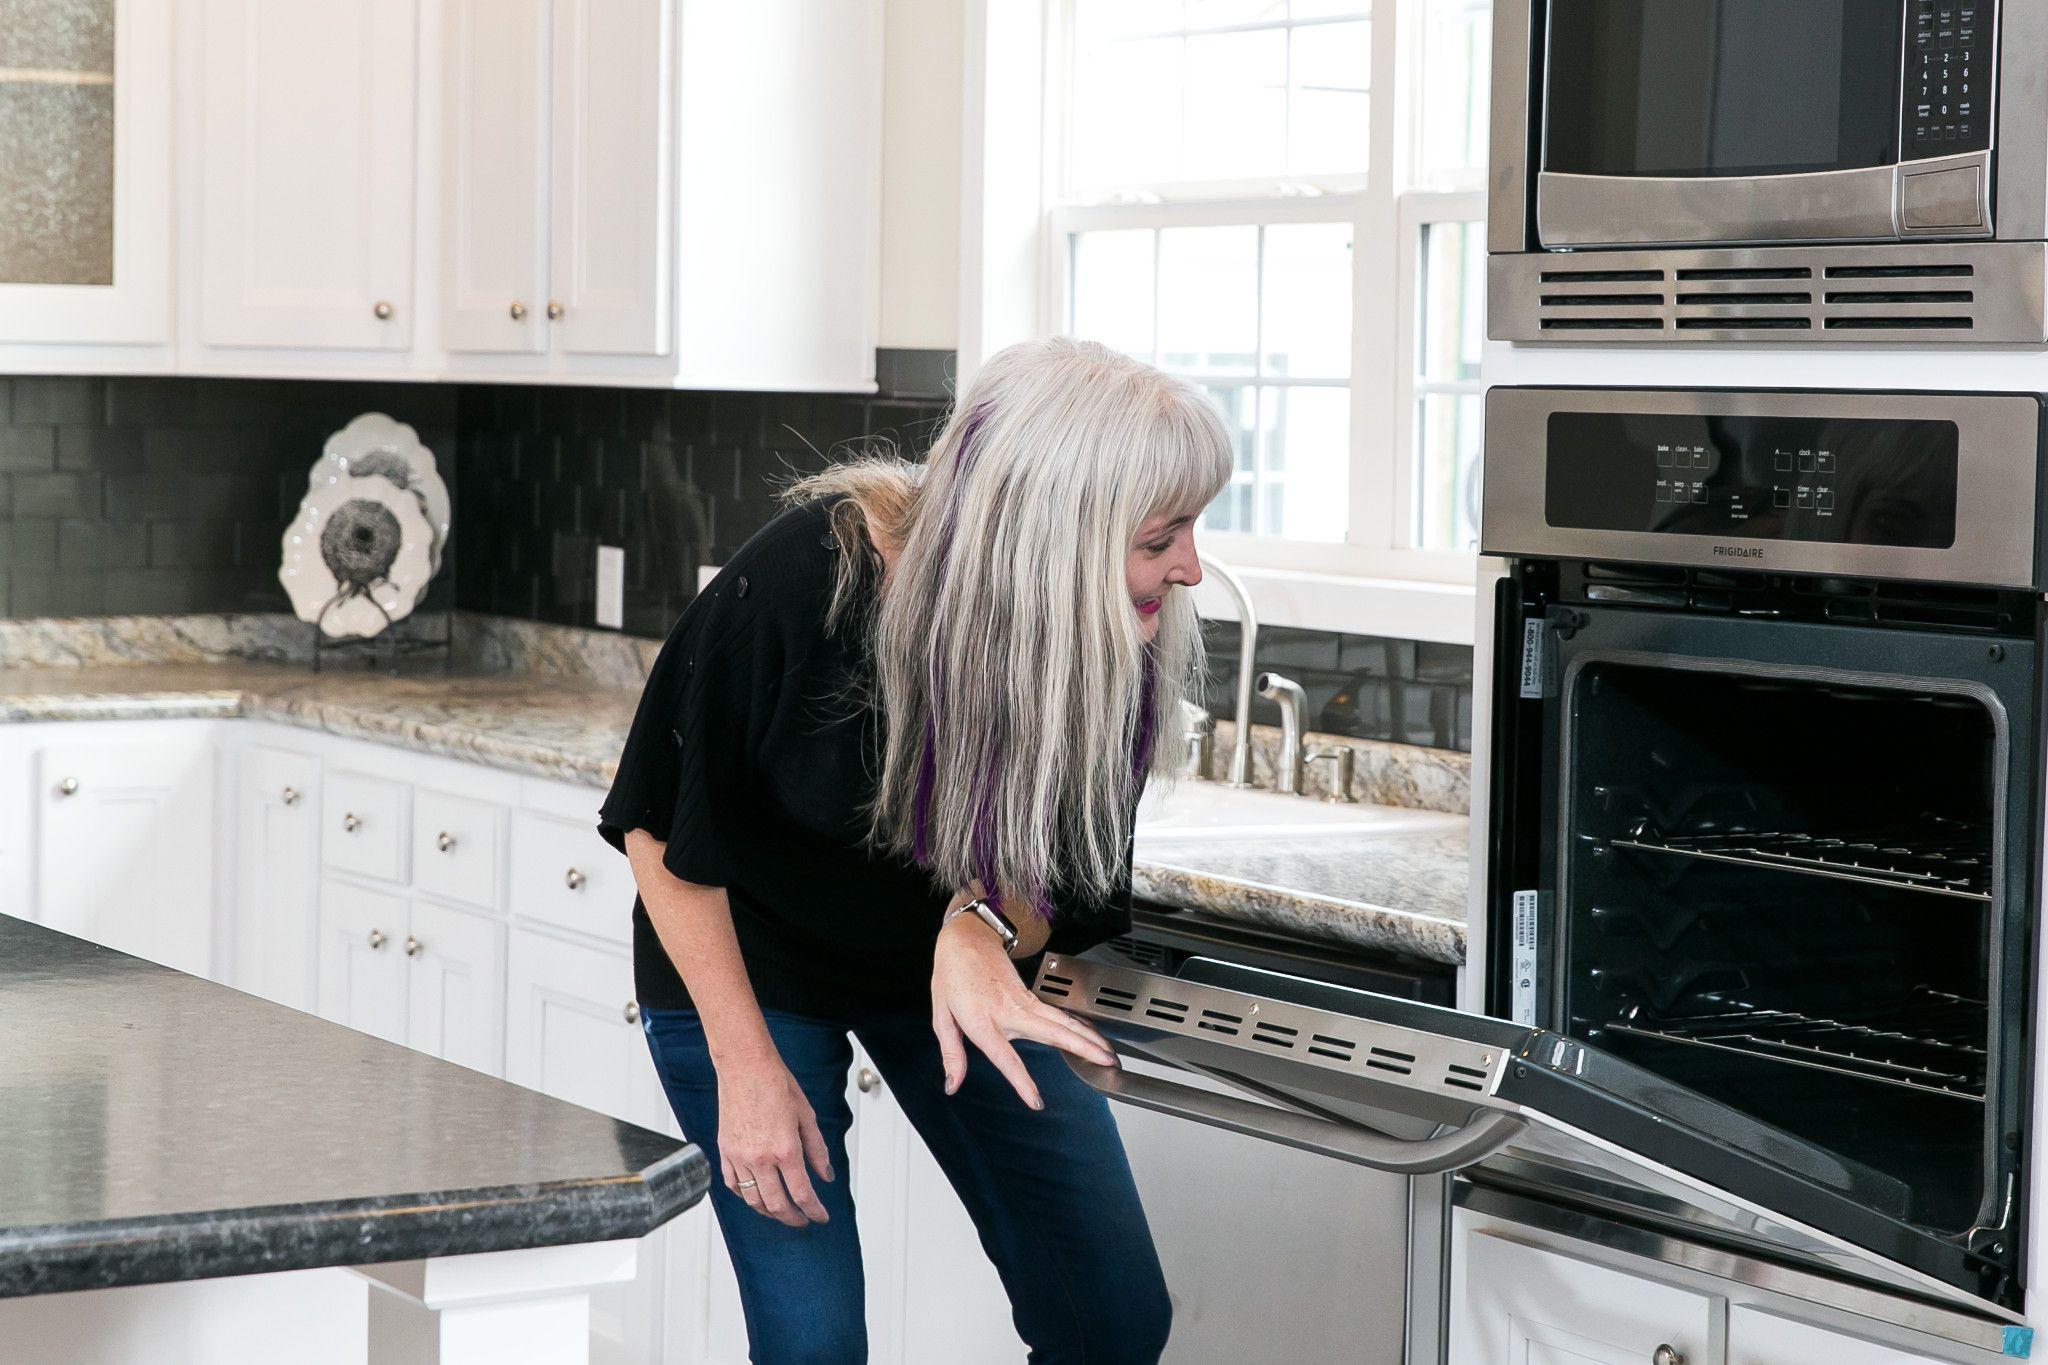 A woman touring a Clayton home bends down to look into the stainless steel oven in a kitchen.